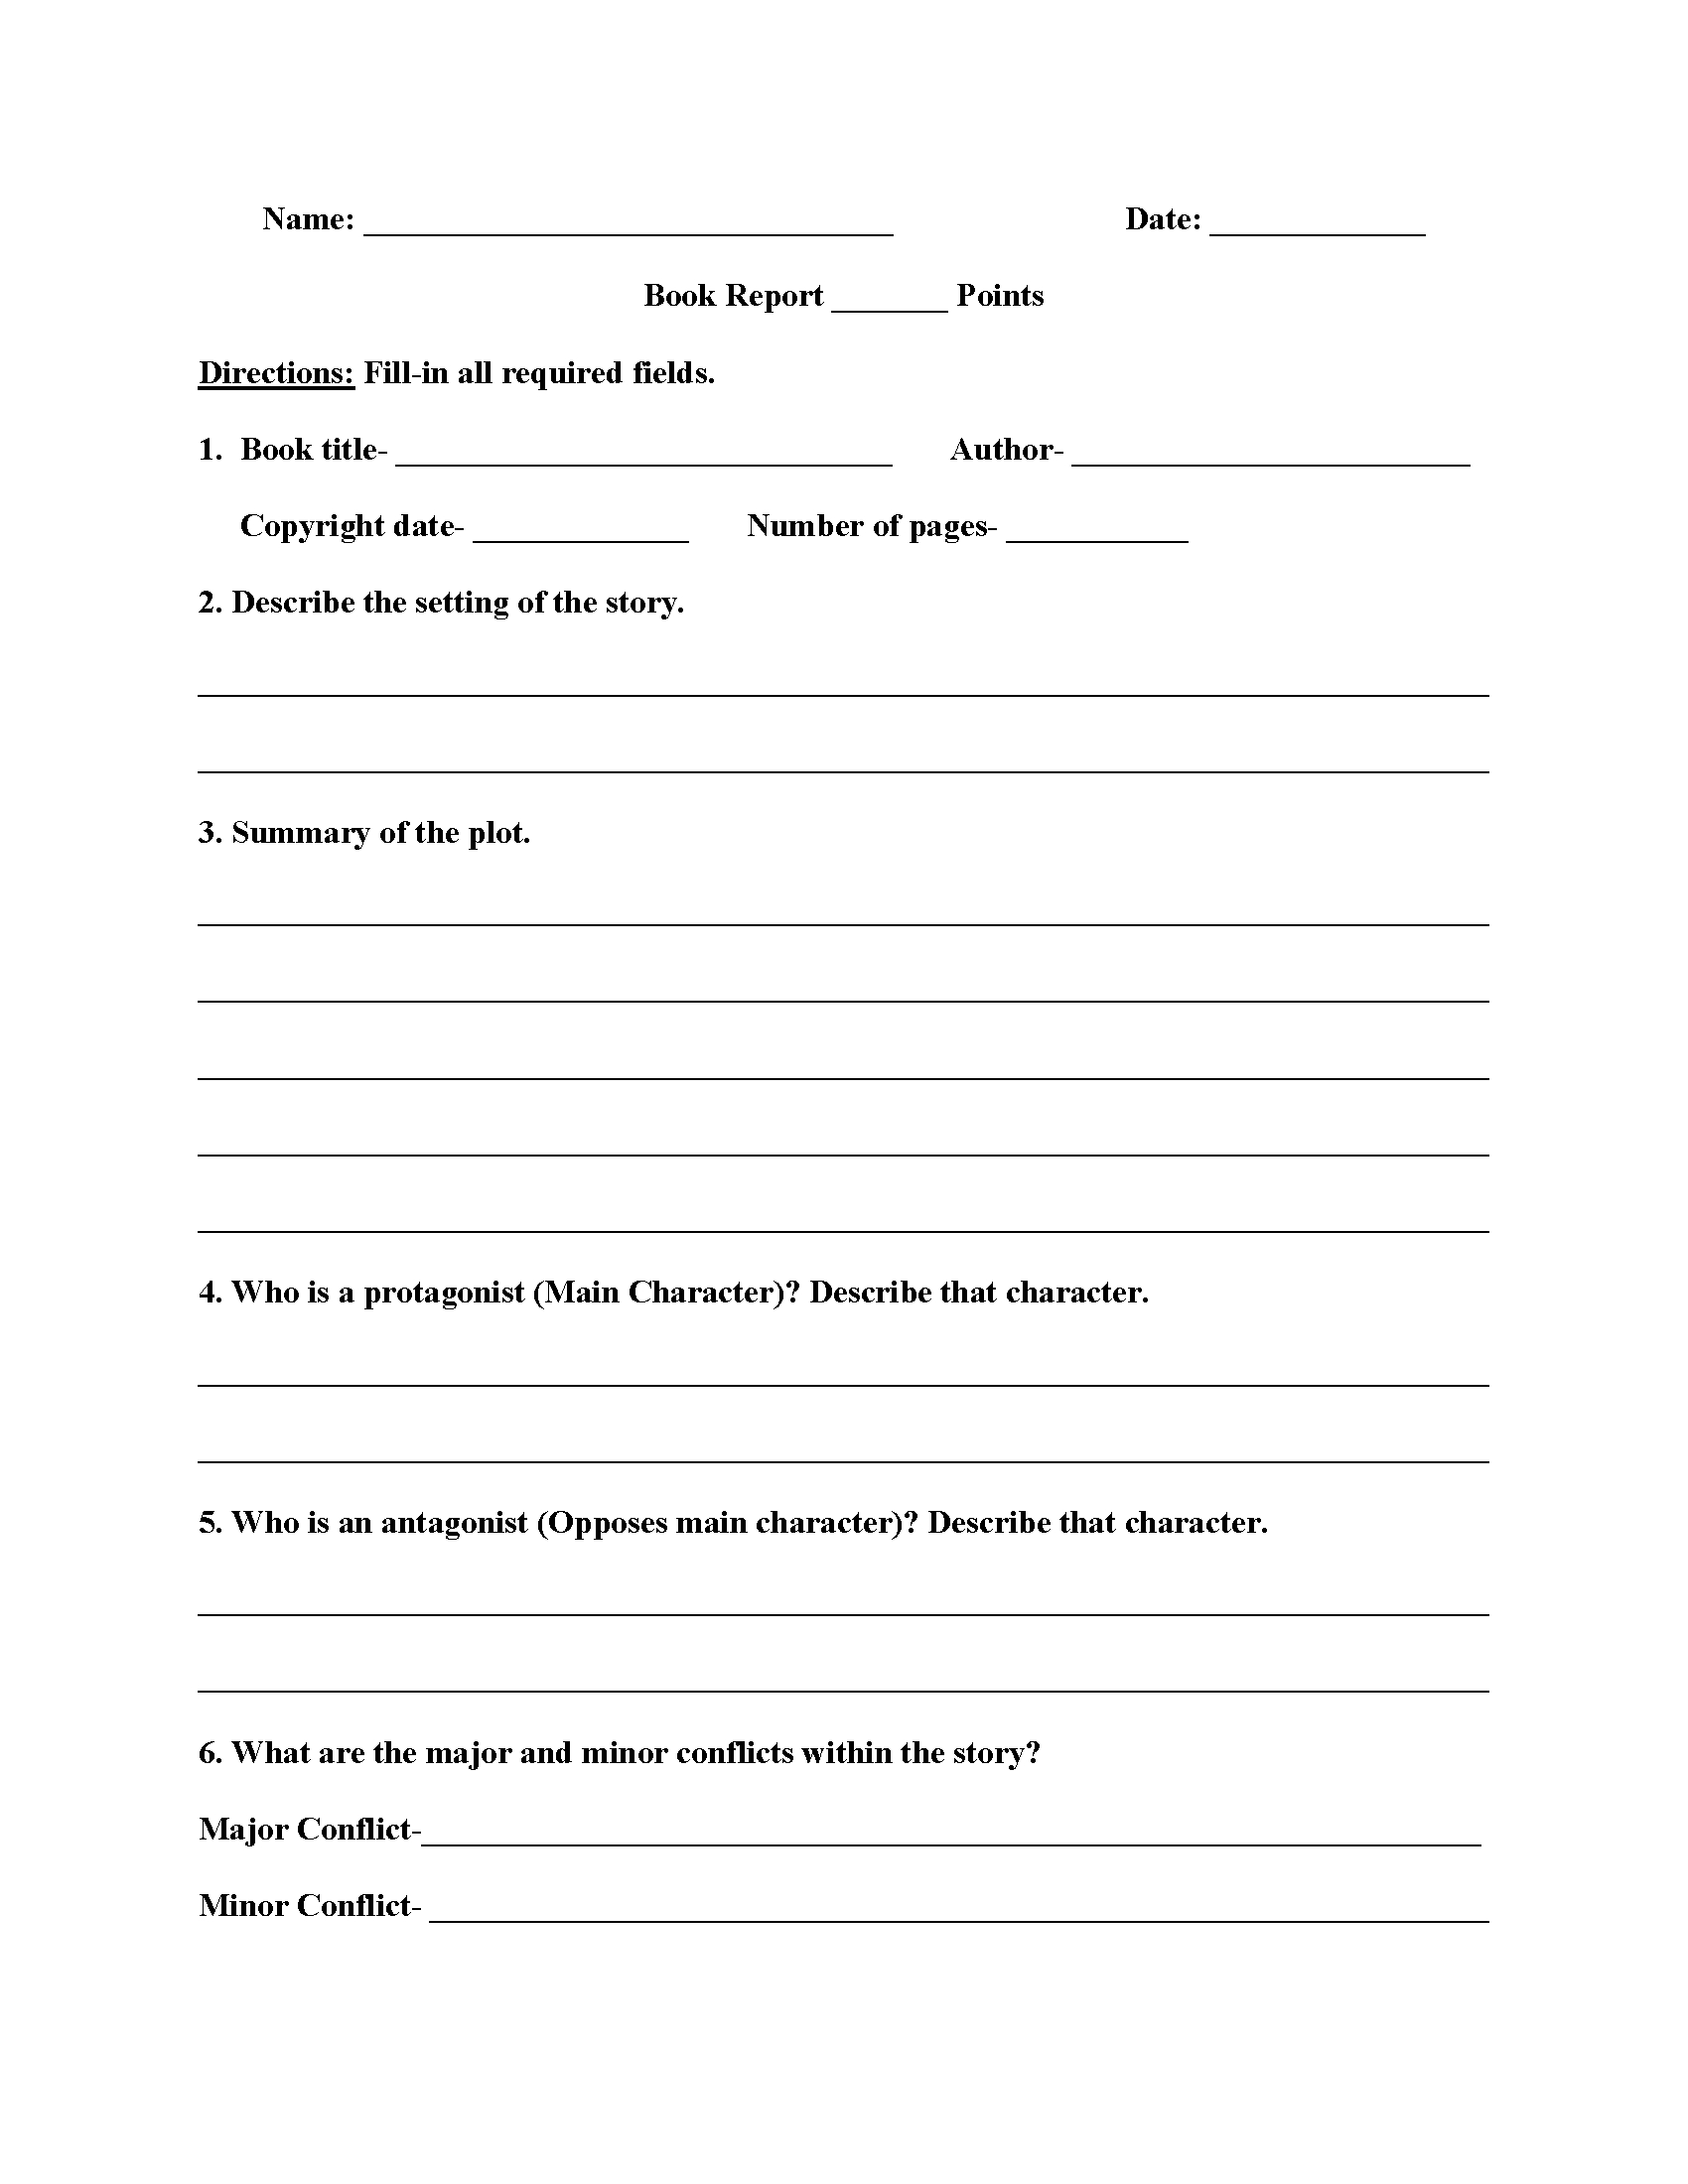 Englishlinx | Book Report Worksheets In 1St Grade Book Report Template